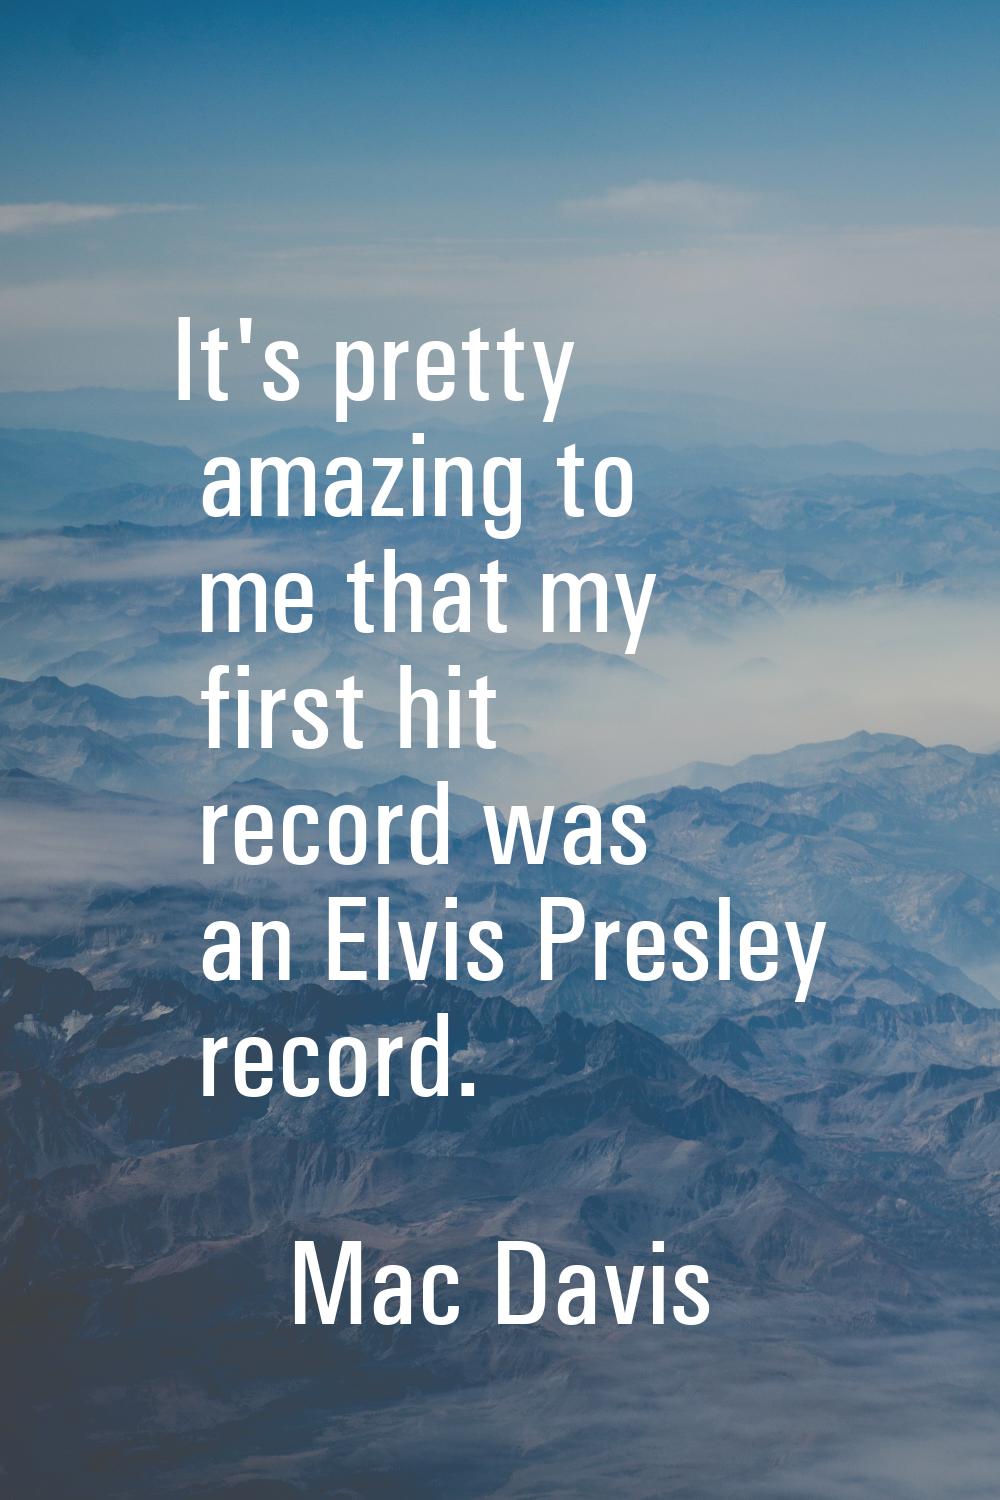 It's pretty amazing to me that my first hit record was an Elvis Presley record.